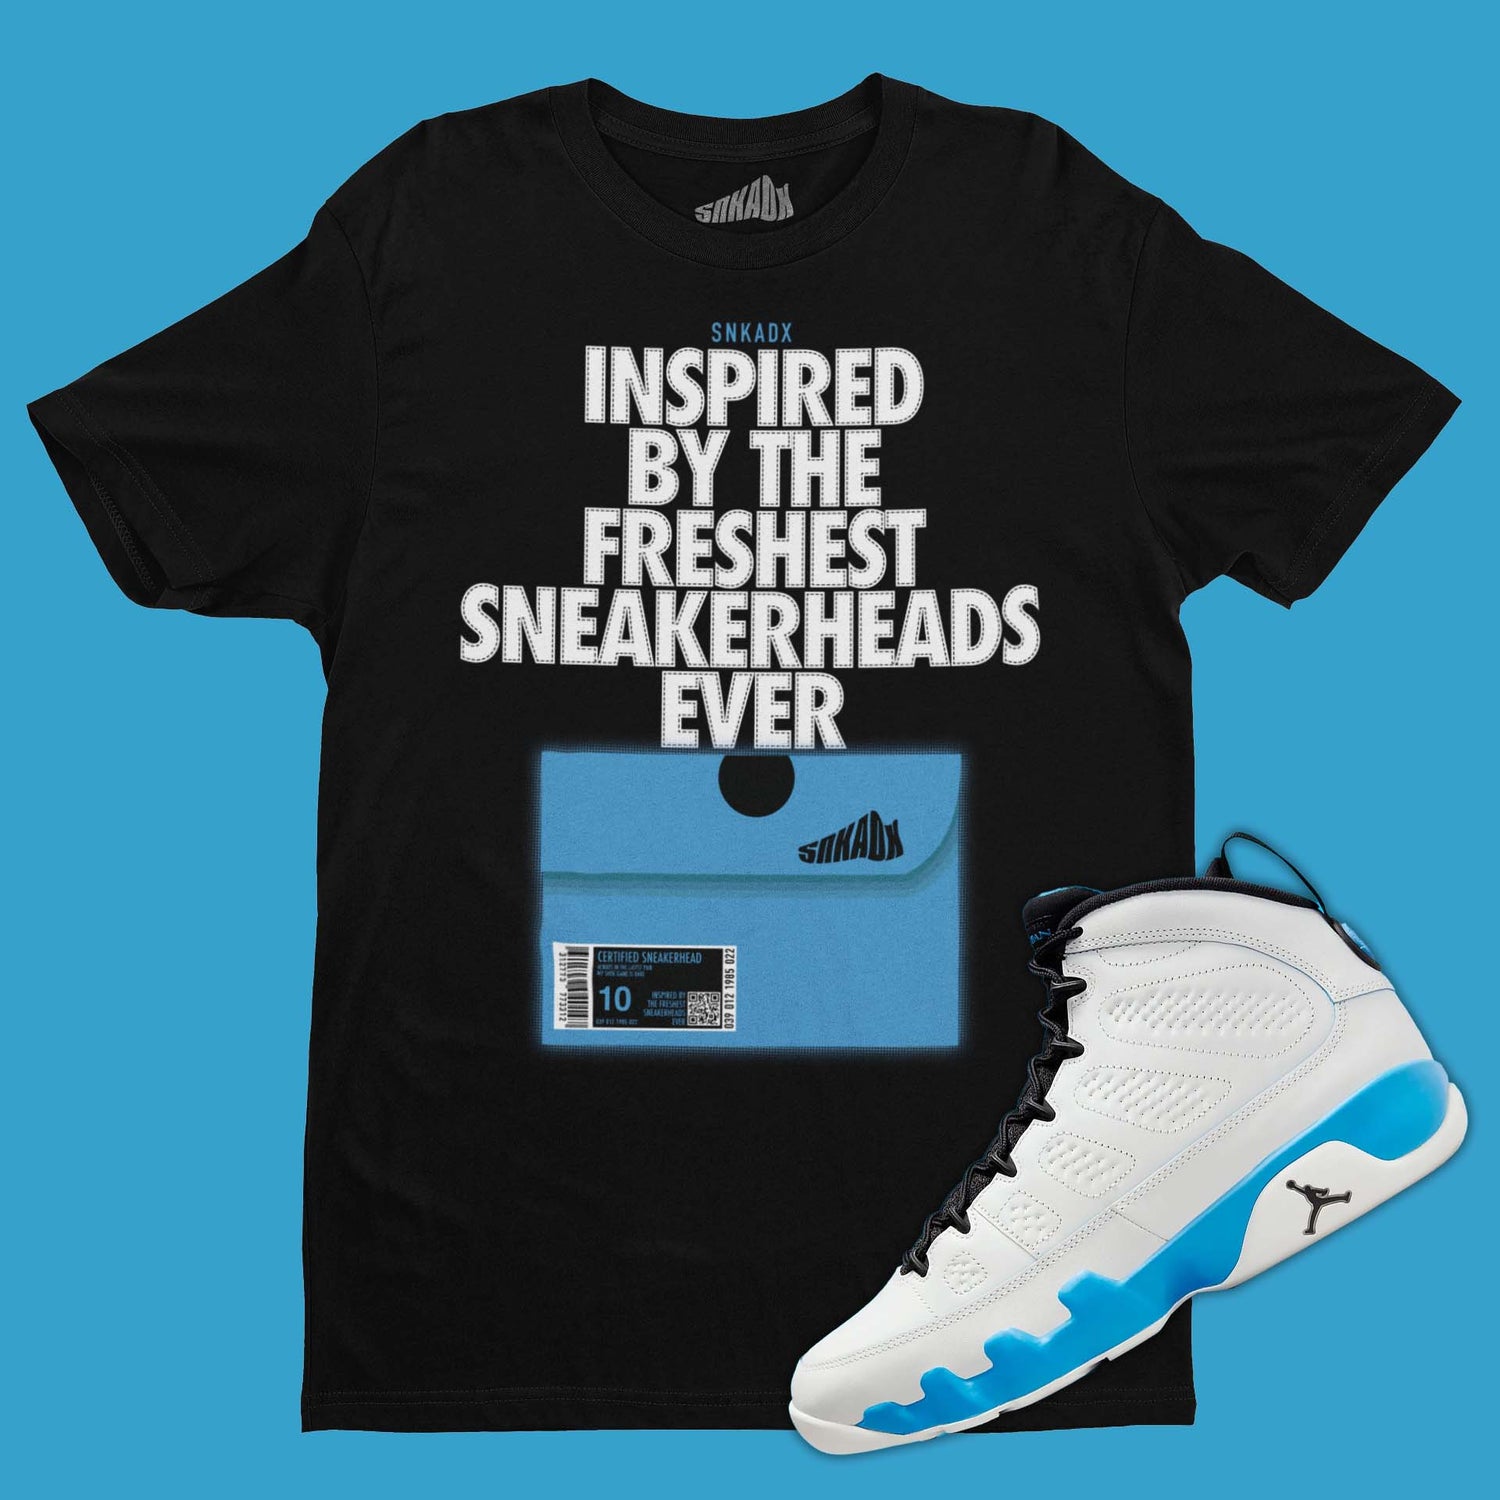 Shoe Box Black T-Shirt Matching Air At a Jordan Brand event for All-Star weekend an attendee was spotted in this